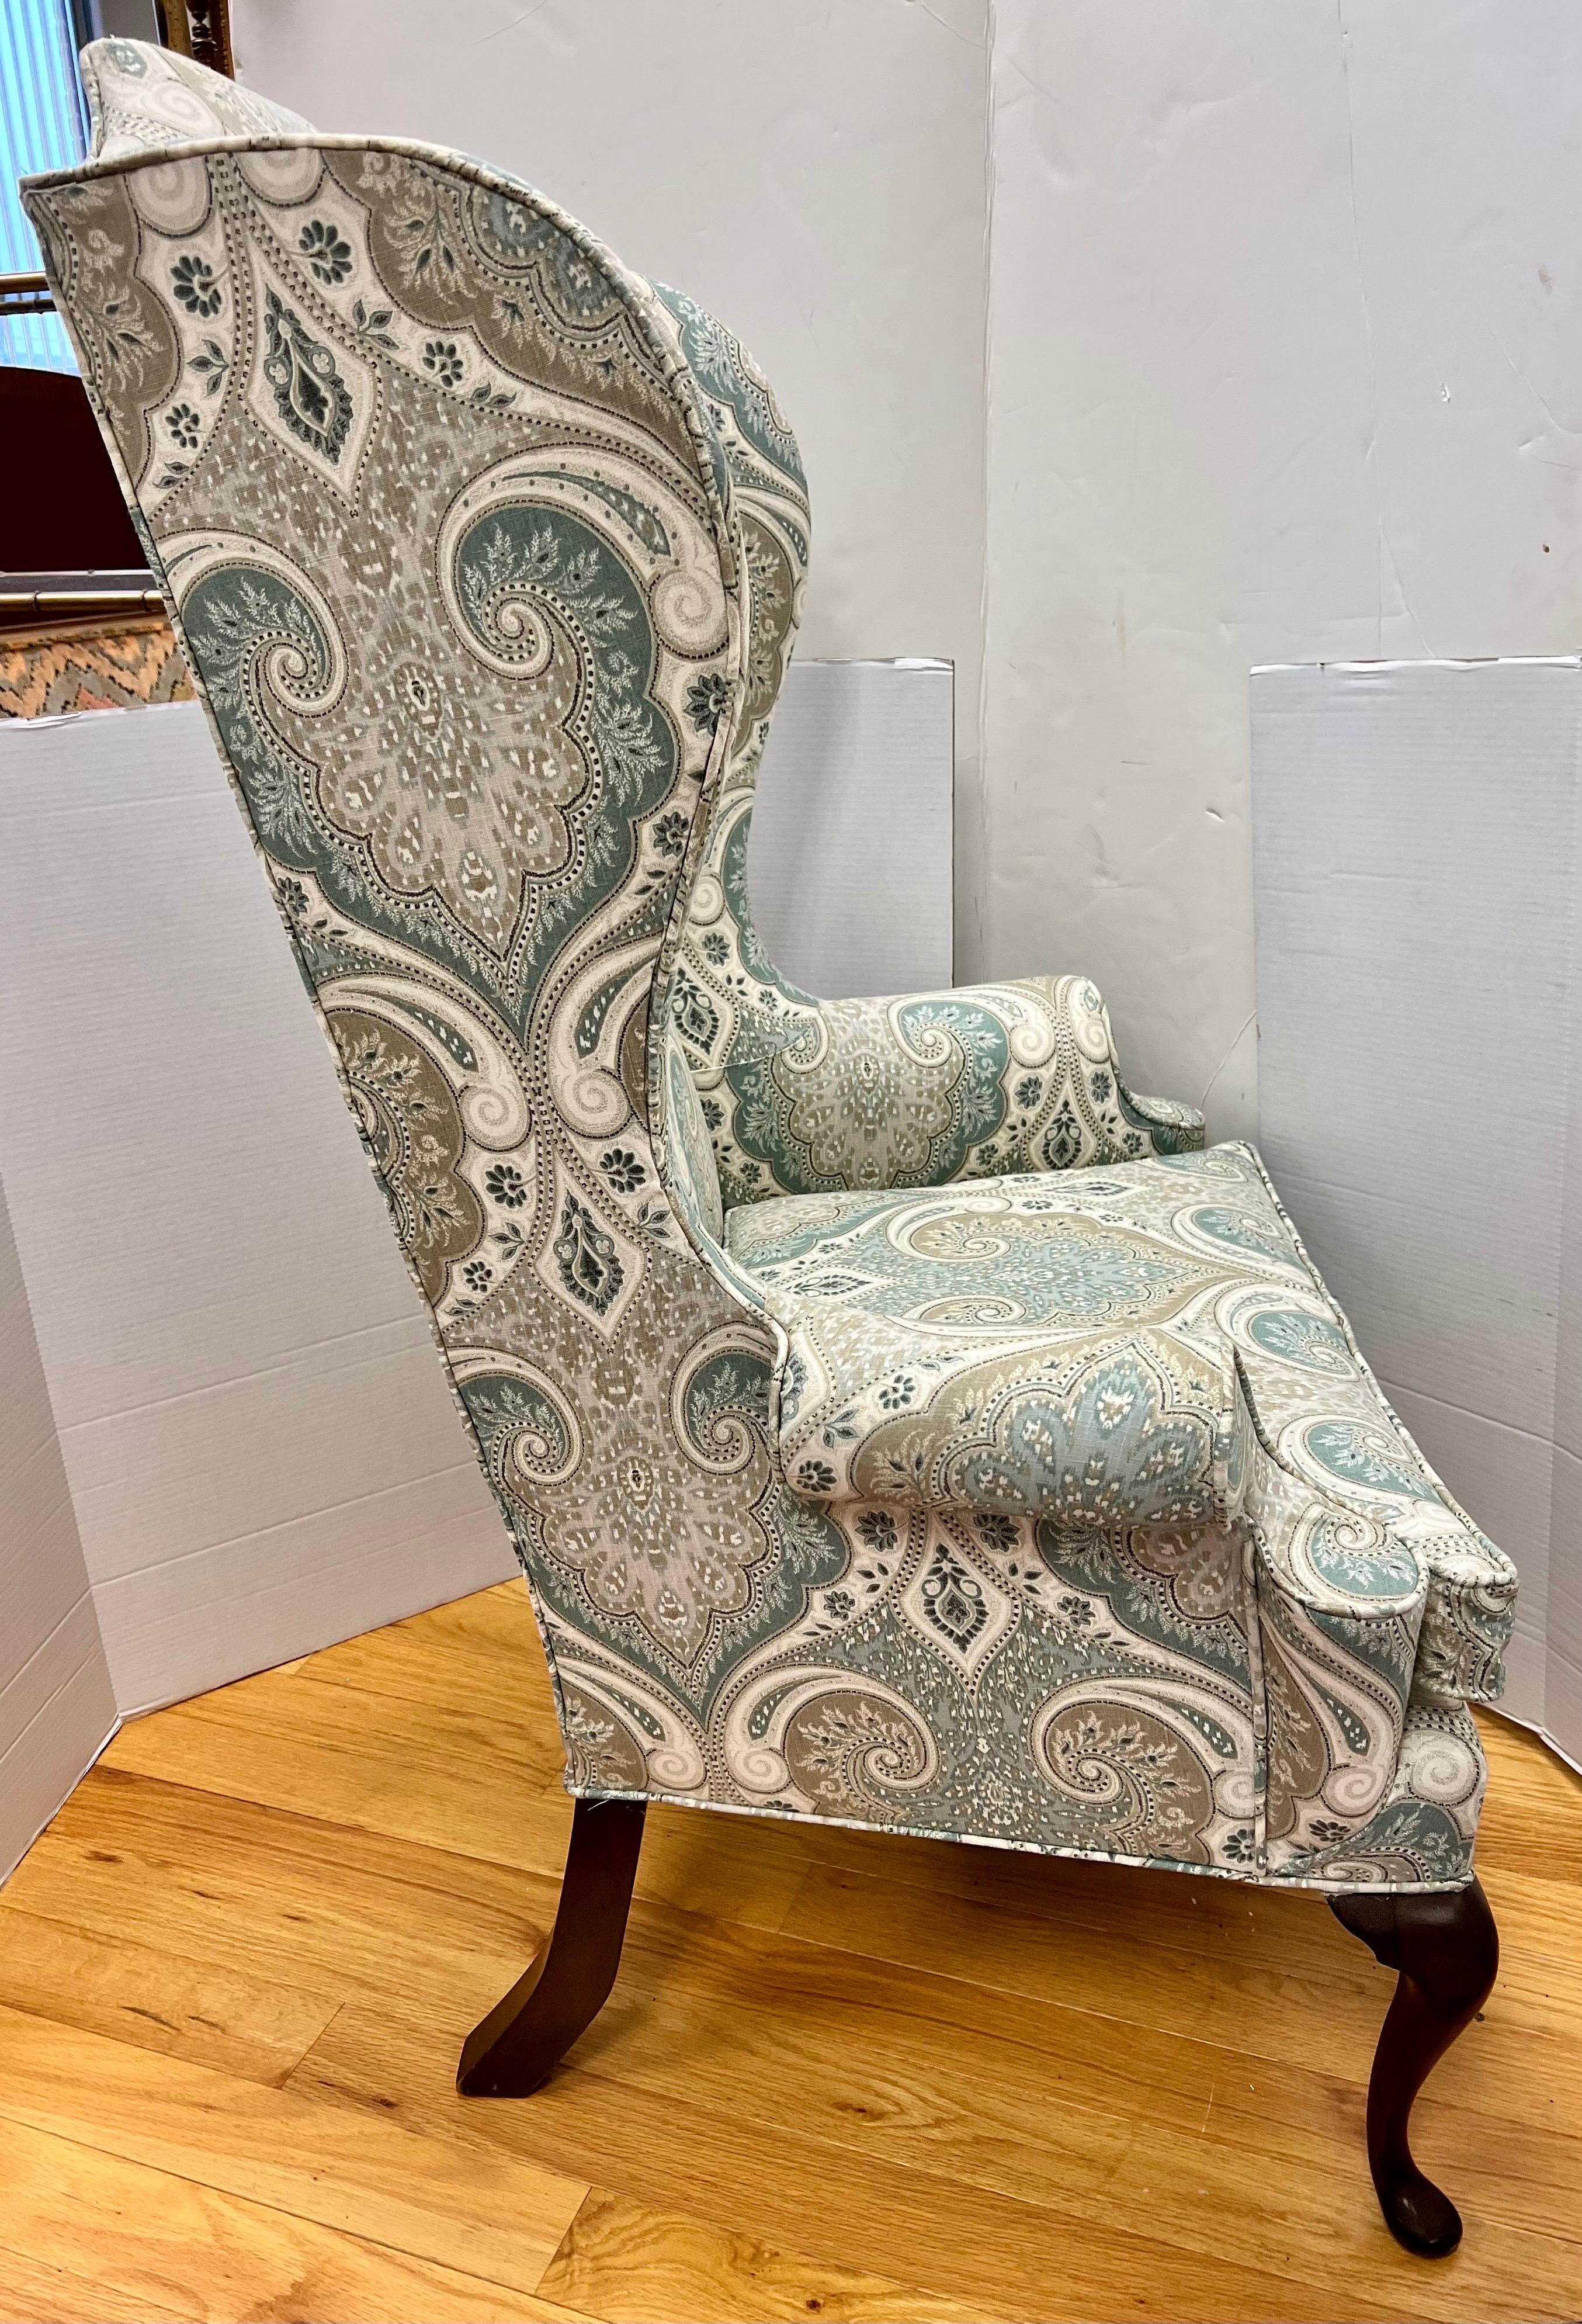 American Vintage Tall Wingback Reading Chair with Elegant Scalamandre Paisley Upholstery